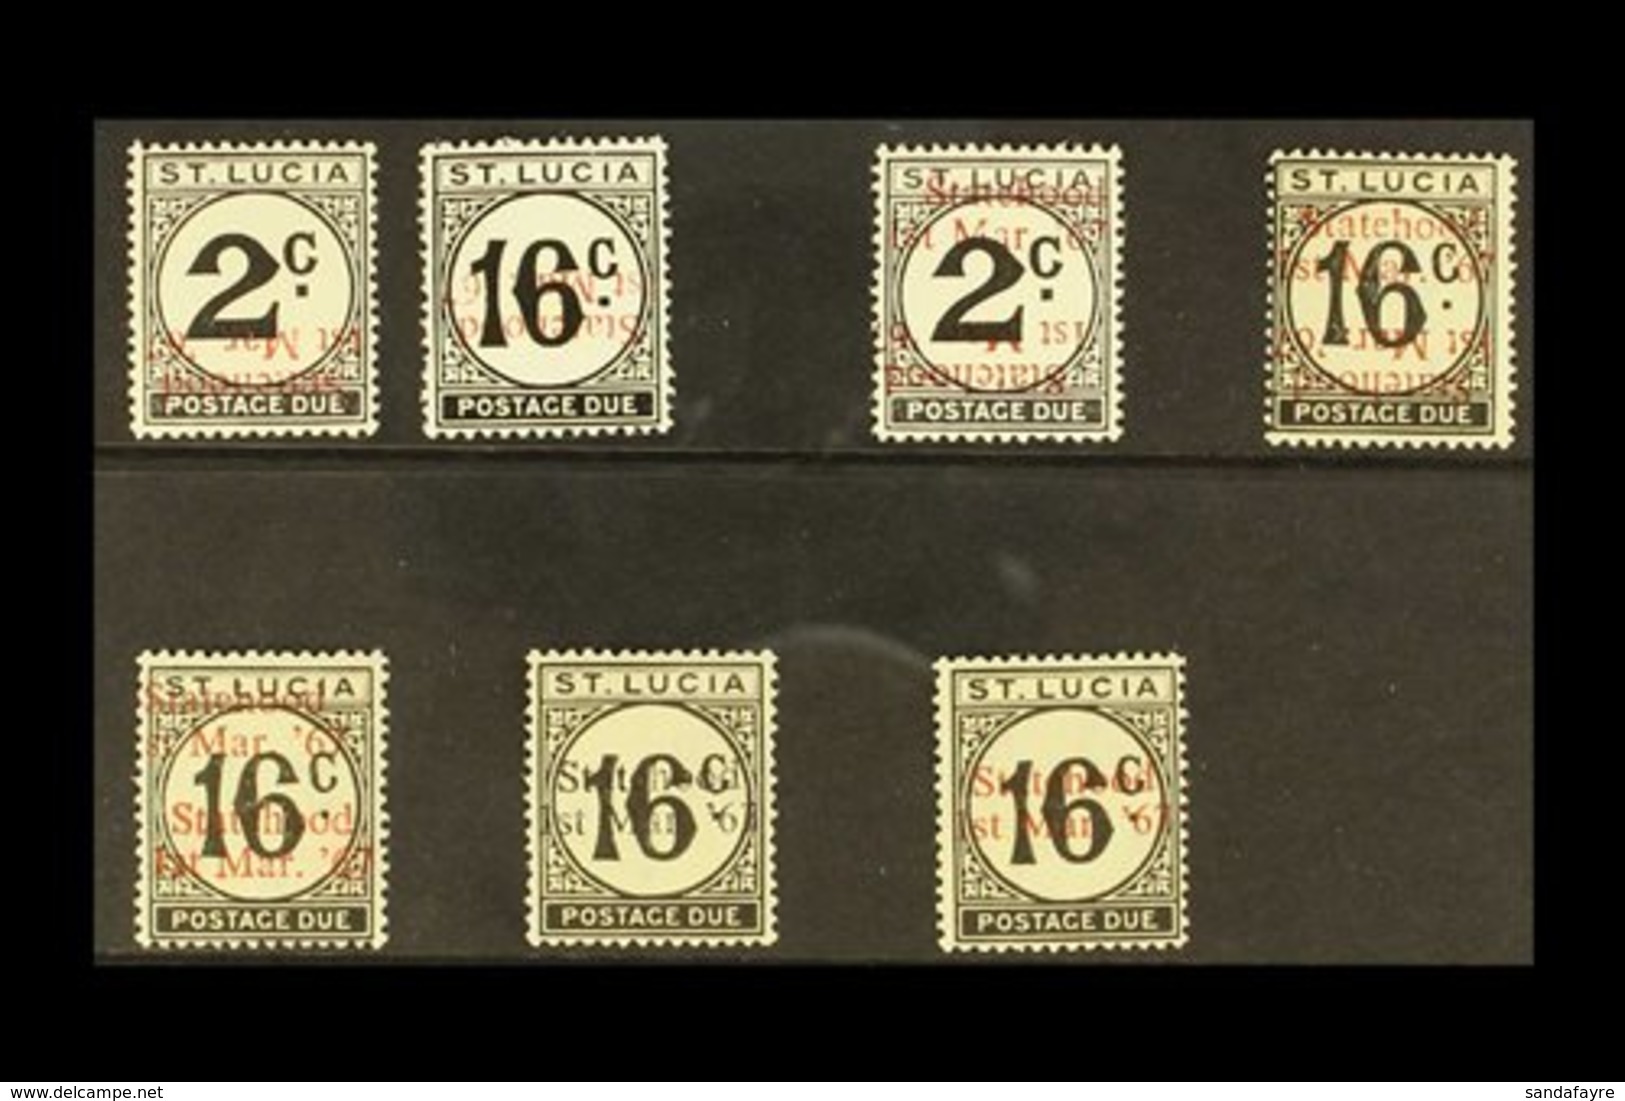 POSTAGE DUES UNISSUED OVERPRINT VARIETIES & ERRORS 1967 Superb Never Hinged Group Of Stamps With "Statehood" Overprints  - St.Lucia (...-1978)